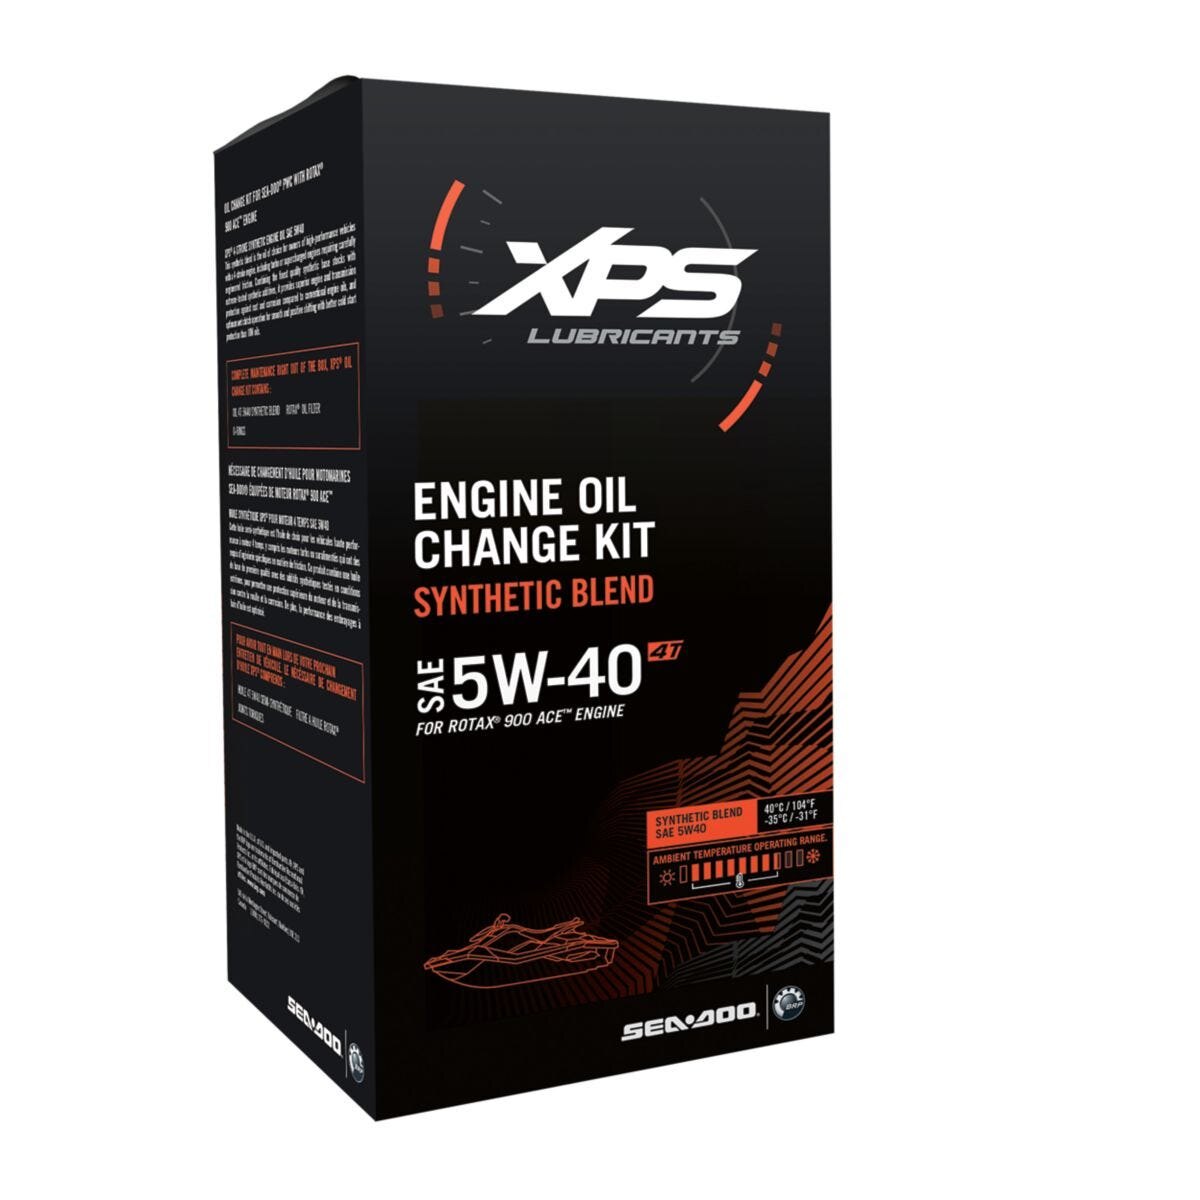 5W 40 Synthetic Blend Oil Change Kit for Sea Doo Rotax 900 ACE Engine